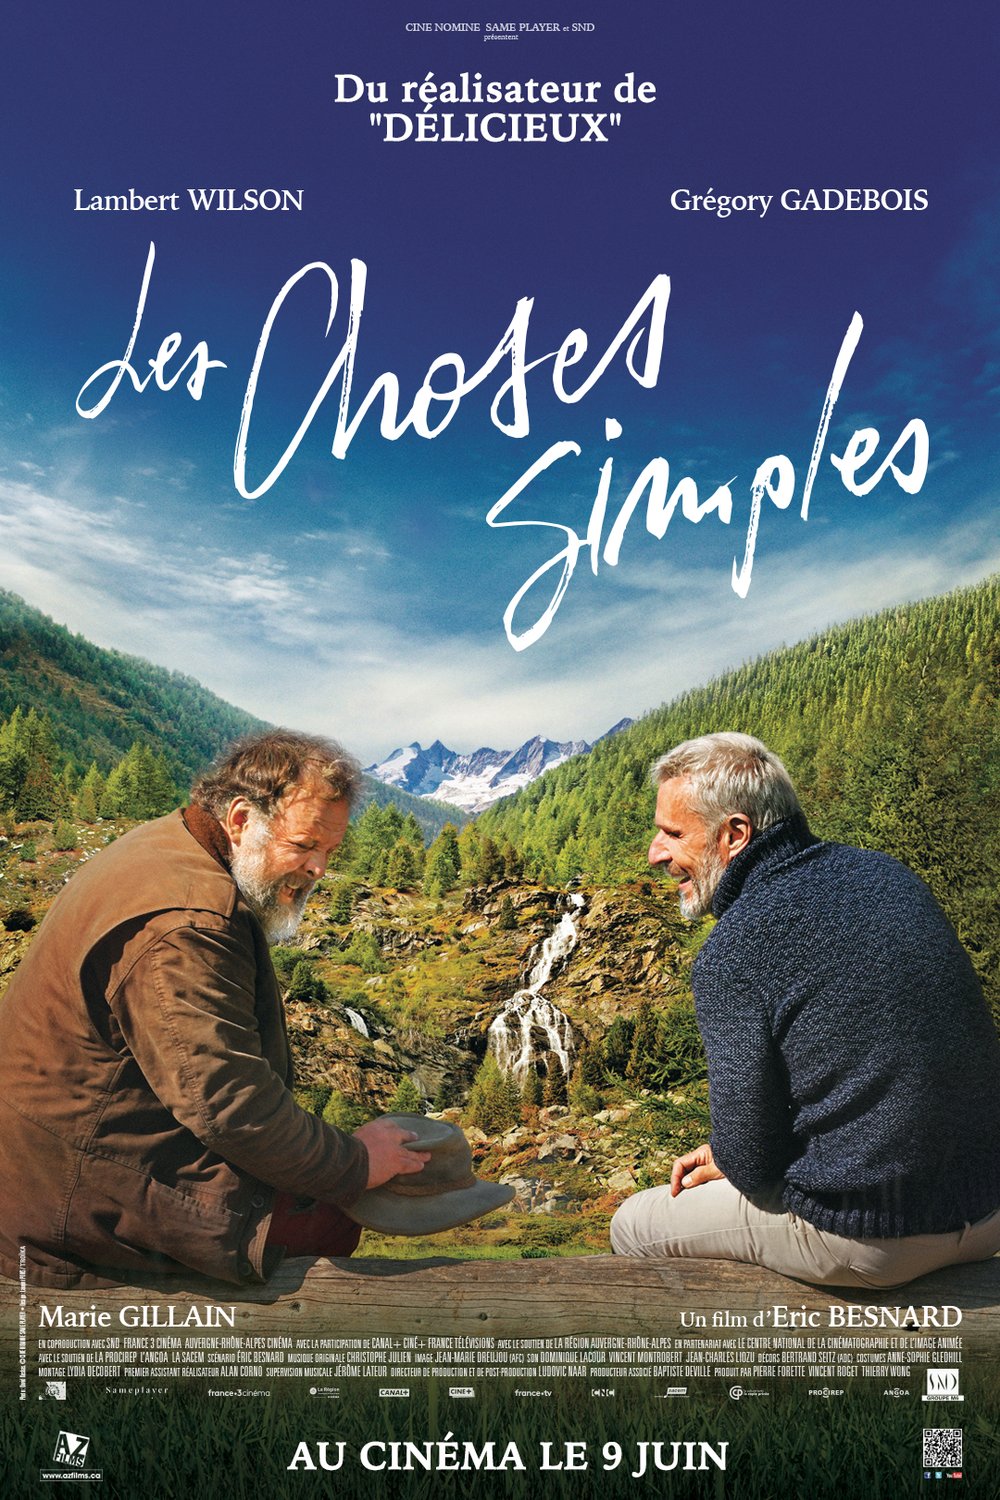 Poster of the movie Les choses simples